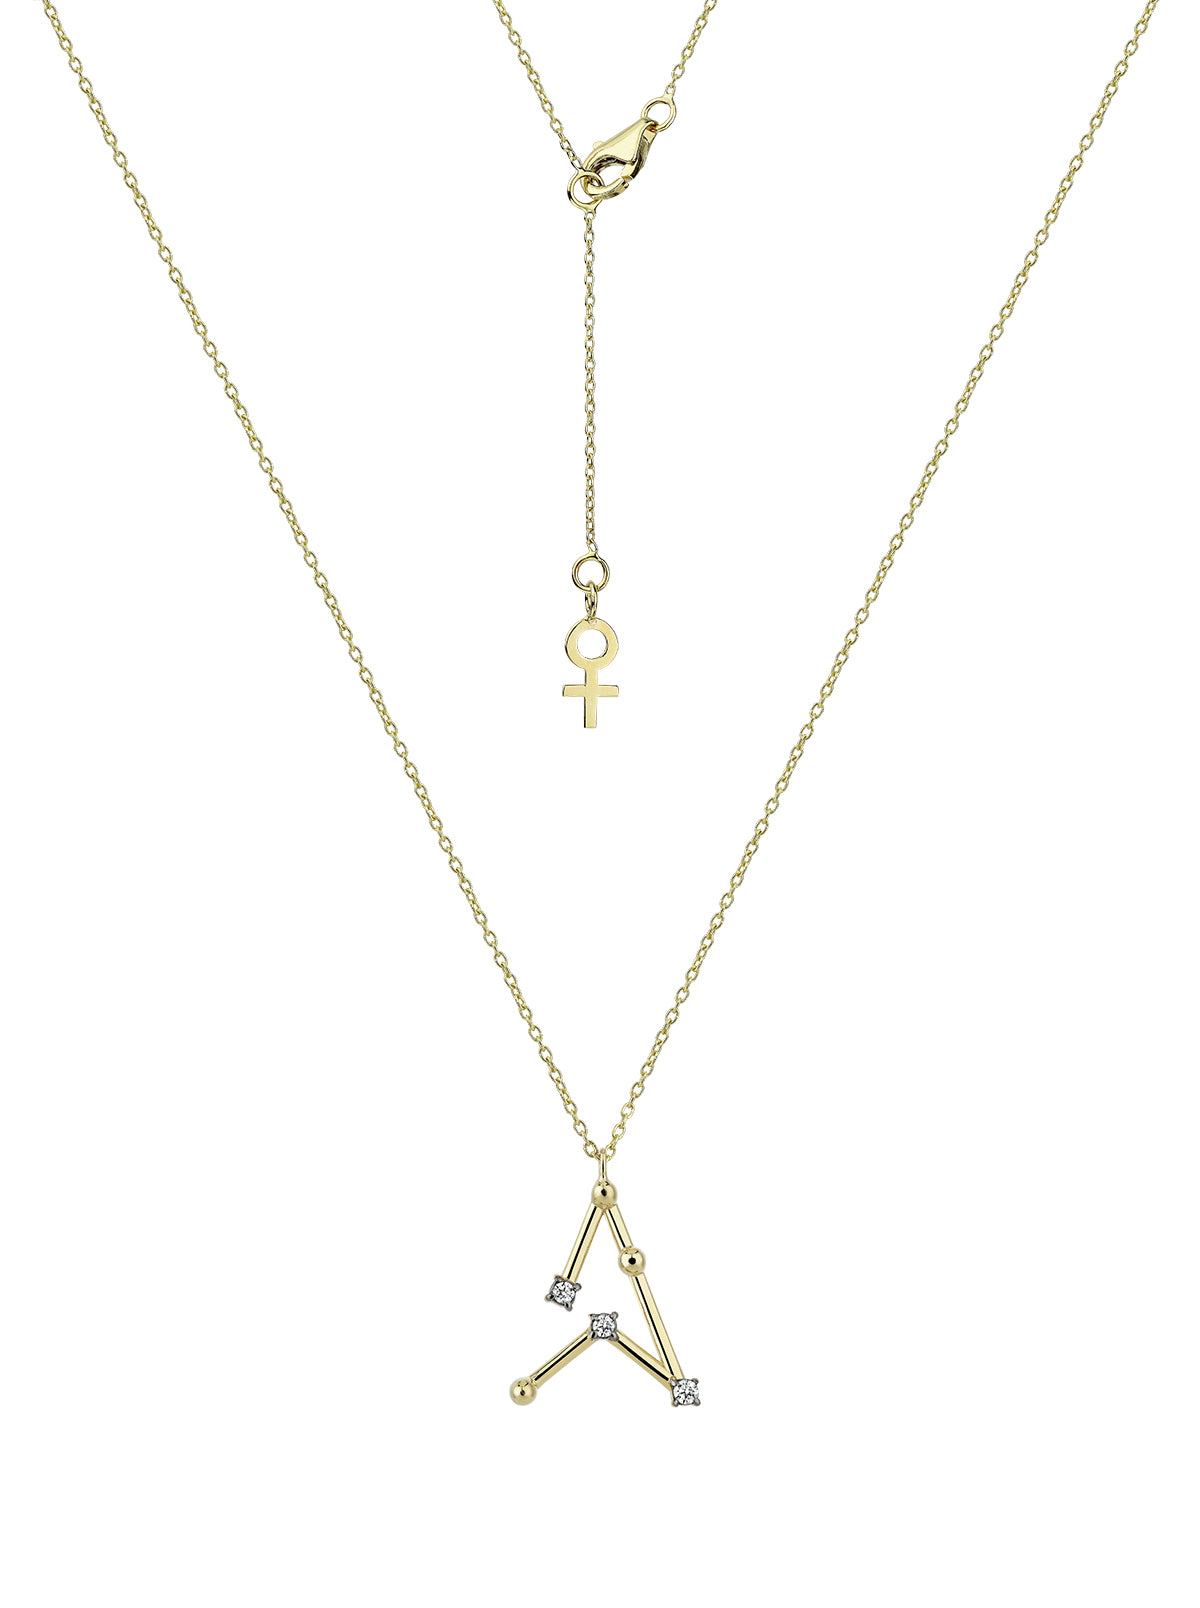 Galactic Necklace Initials in Yellow Gold - Her Story Shop